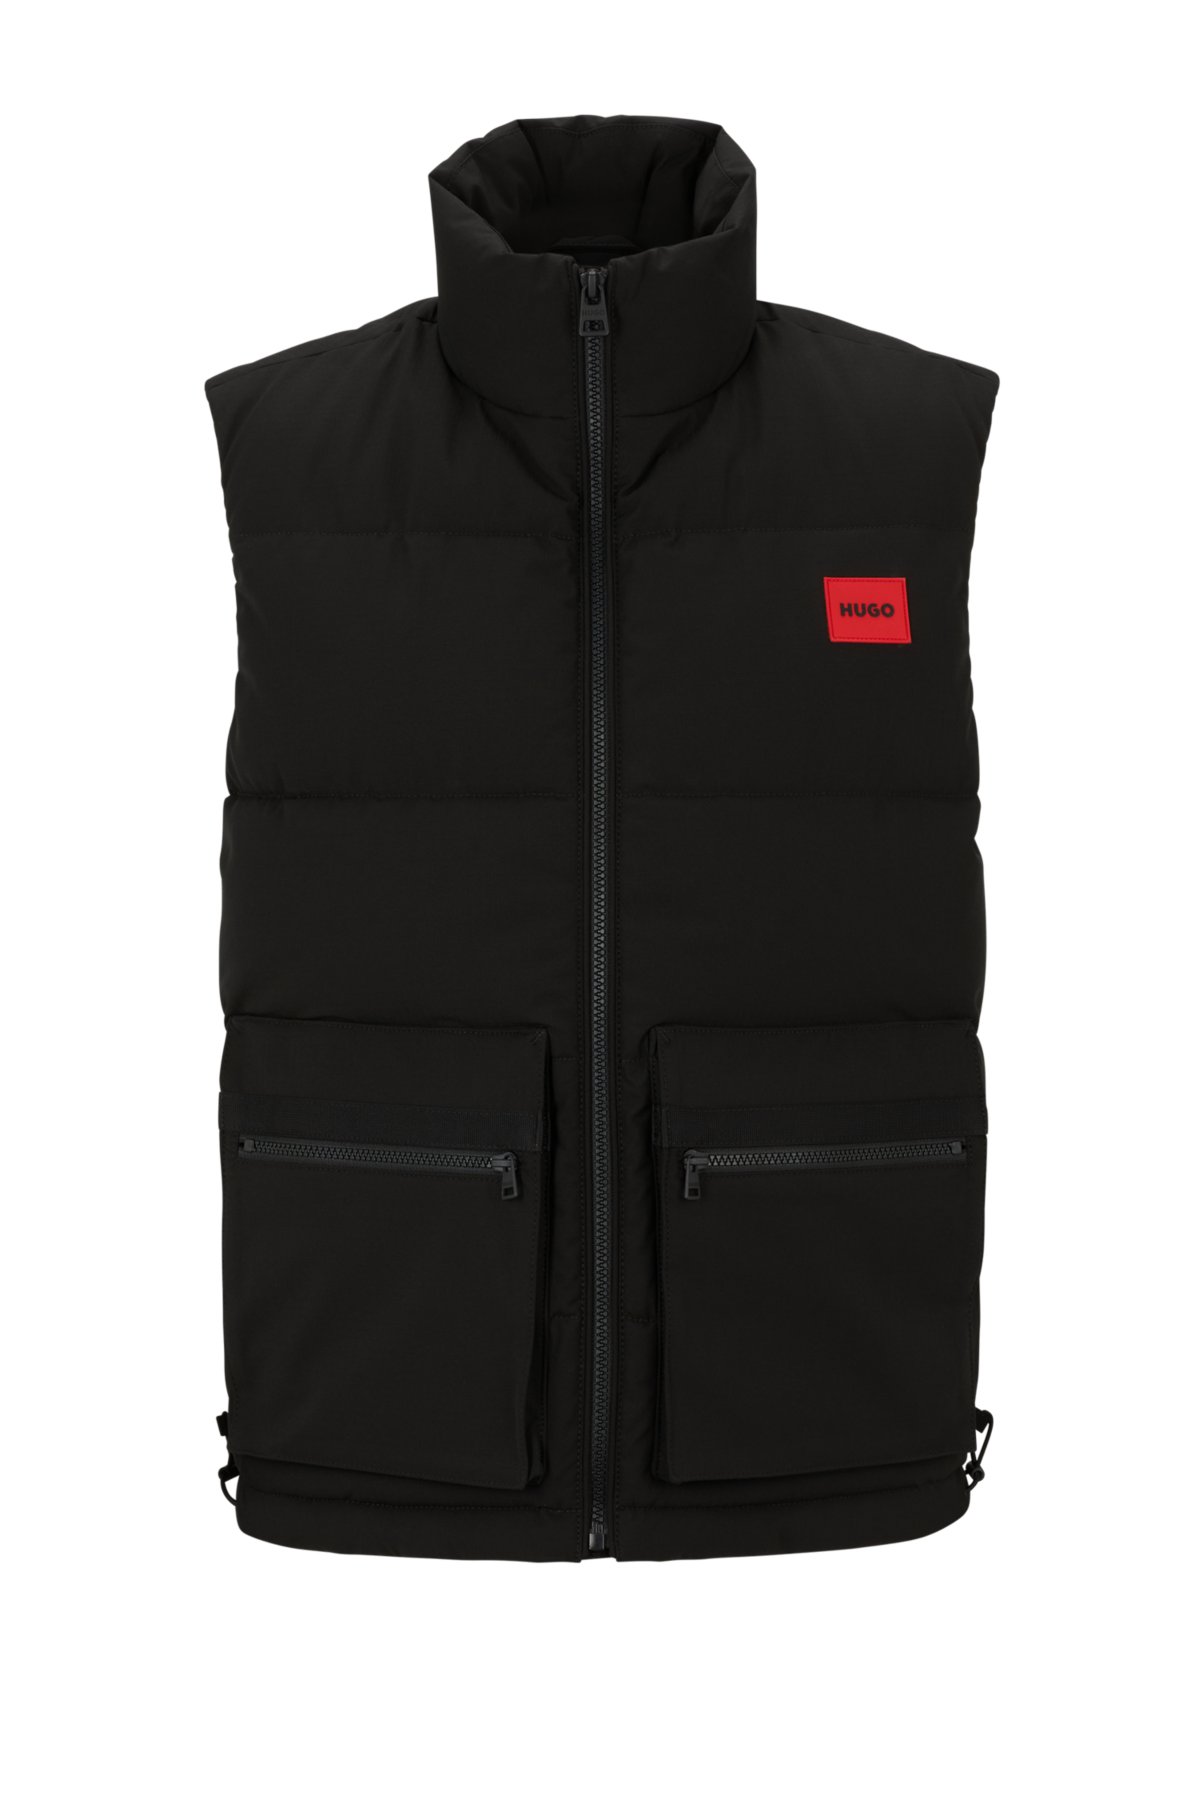 badge HUGO gilet with Water-repellent - red logo